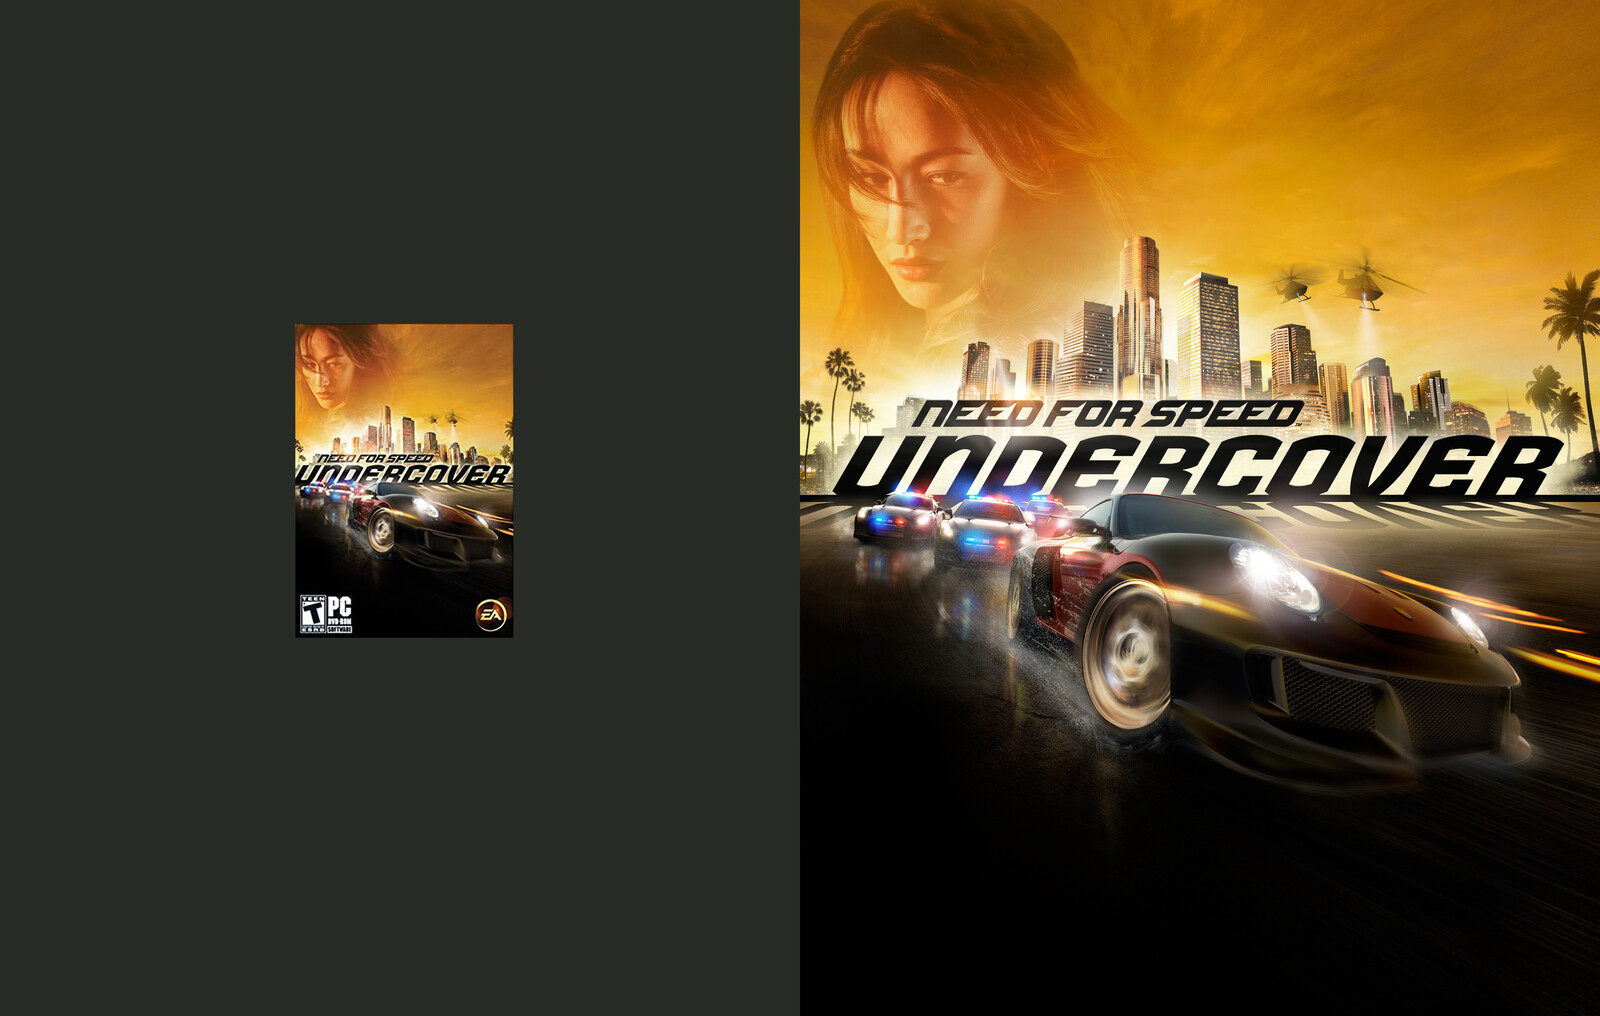 Need for Speed: Undercover (Original Scan vs. Poster format)